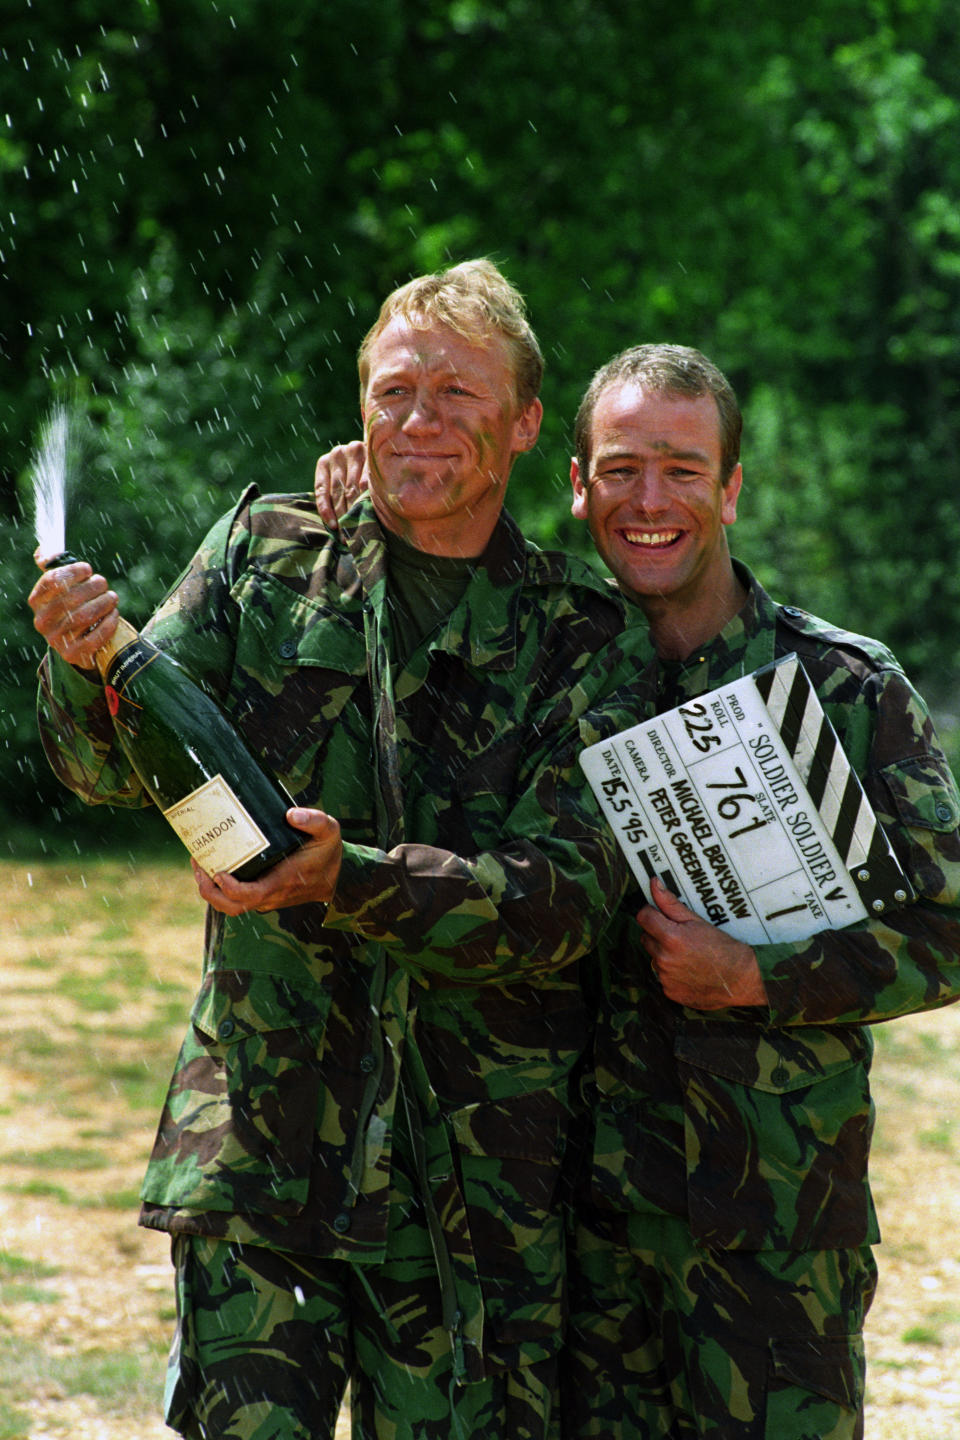 JEROME FLYNN AND ROBSON GREEN, ON RIGHT, CELEBRATING THEIR NO 1 HIT RECORD, UNCHAINED MELODY, TAKEN FROM THE ITV PROGRAMME SOLDIER SOLDIER.   (Photo by Tim Ockenden - PA Images/PA Images via Getty Images)